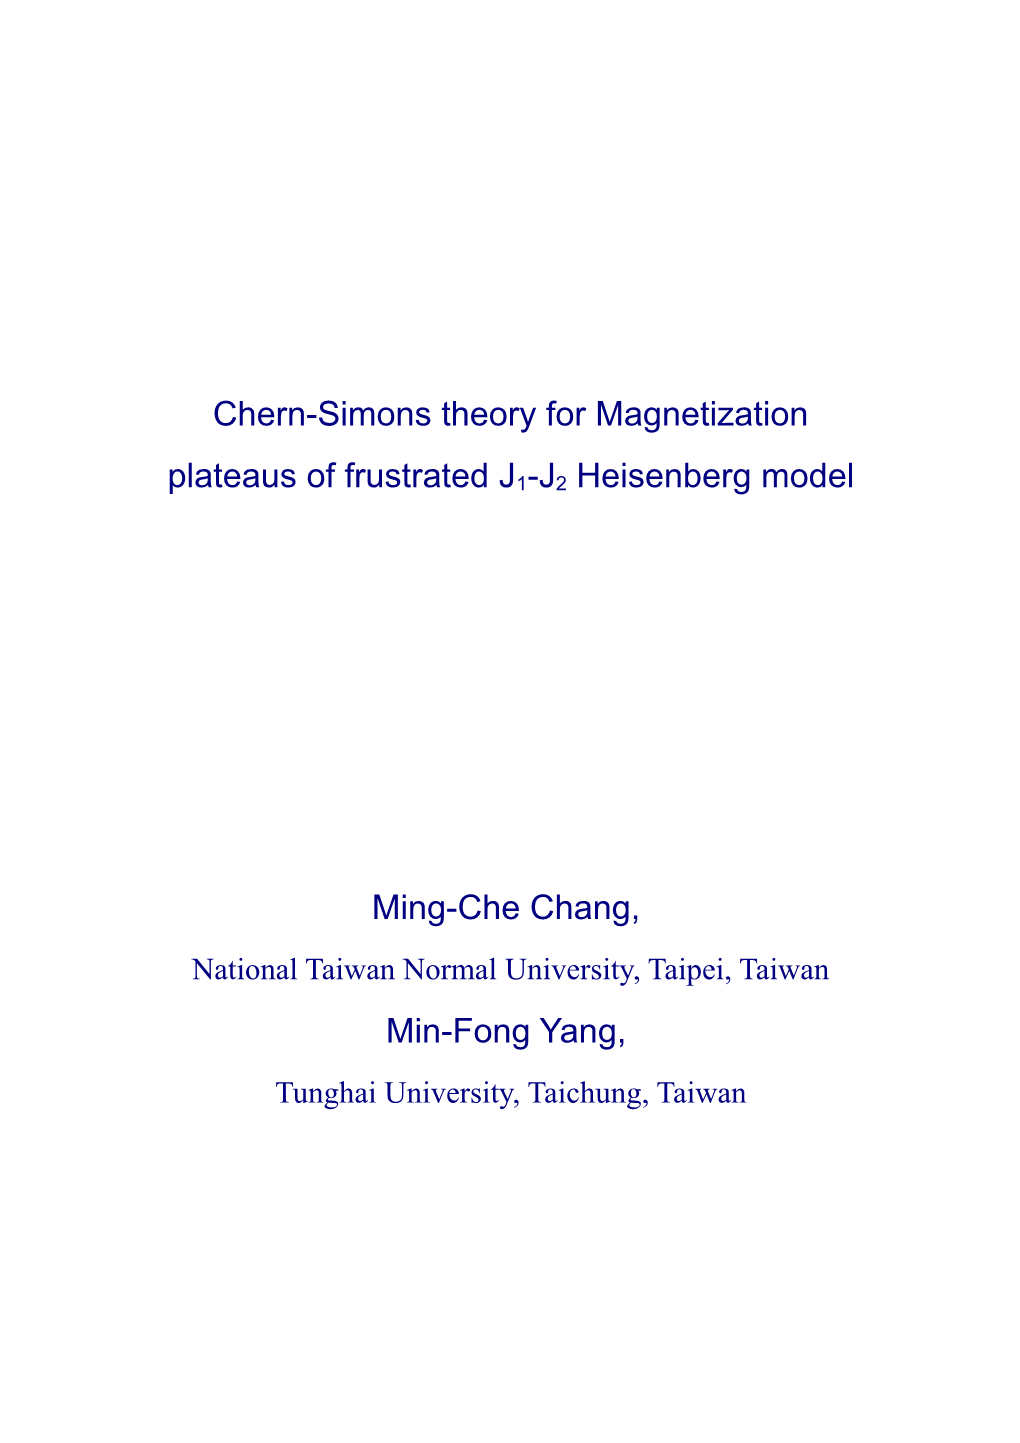 Chern-Simons Theory for Magnetization Plateaus of Frustrated J1-J2 Heisenberg Model